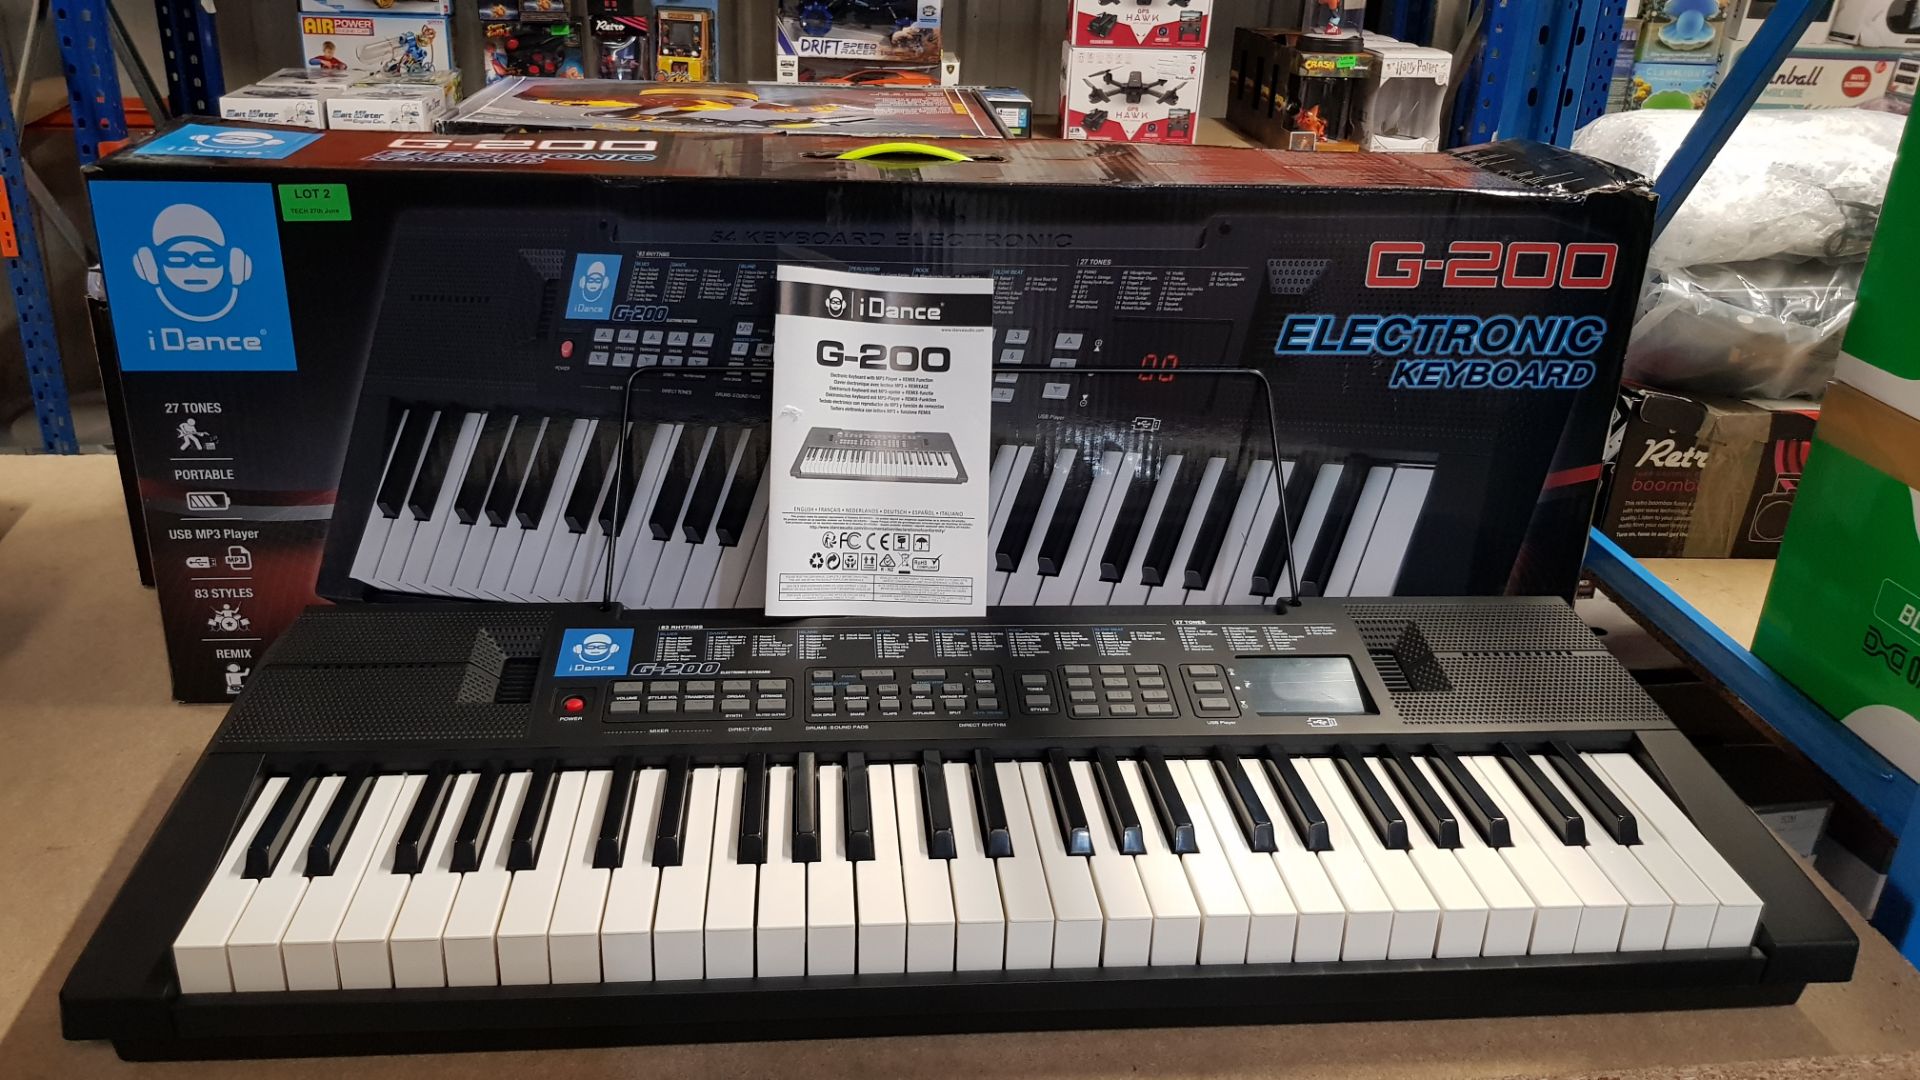 (R11E) 1x iDance Electronic Keyboard G200. 27 Tones. USB MP3 Player. 83 Percussion Styles. (Power L - Image 2 of 2